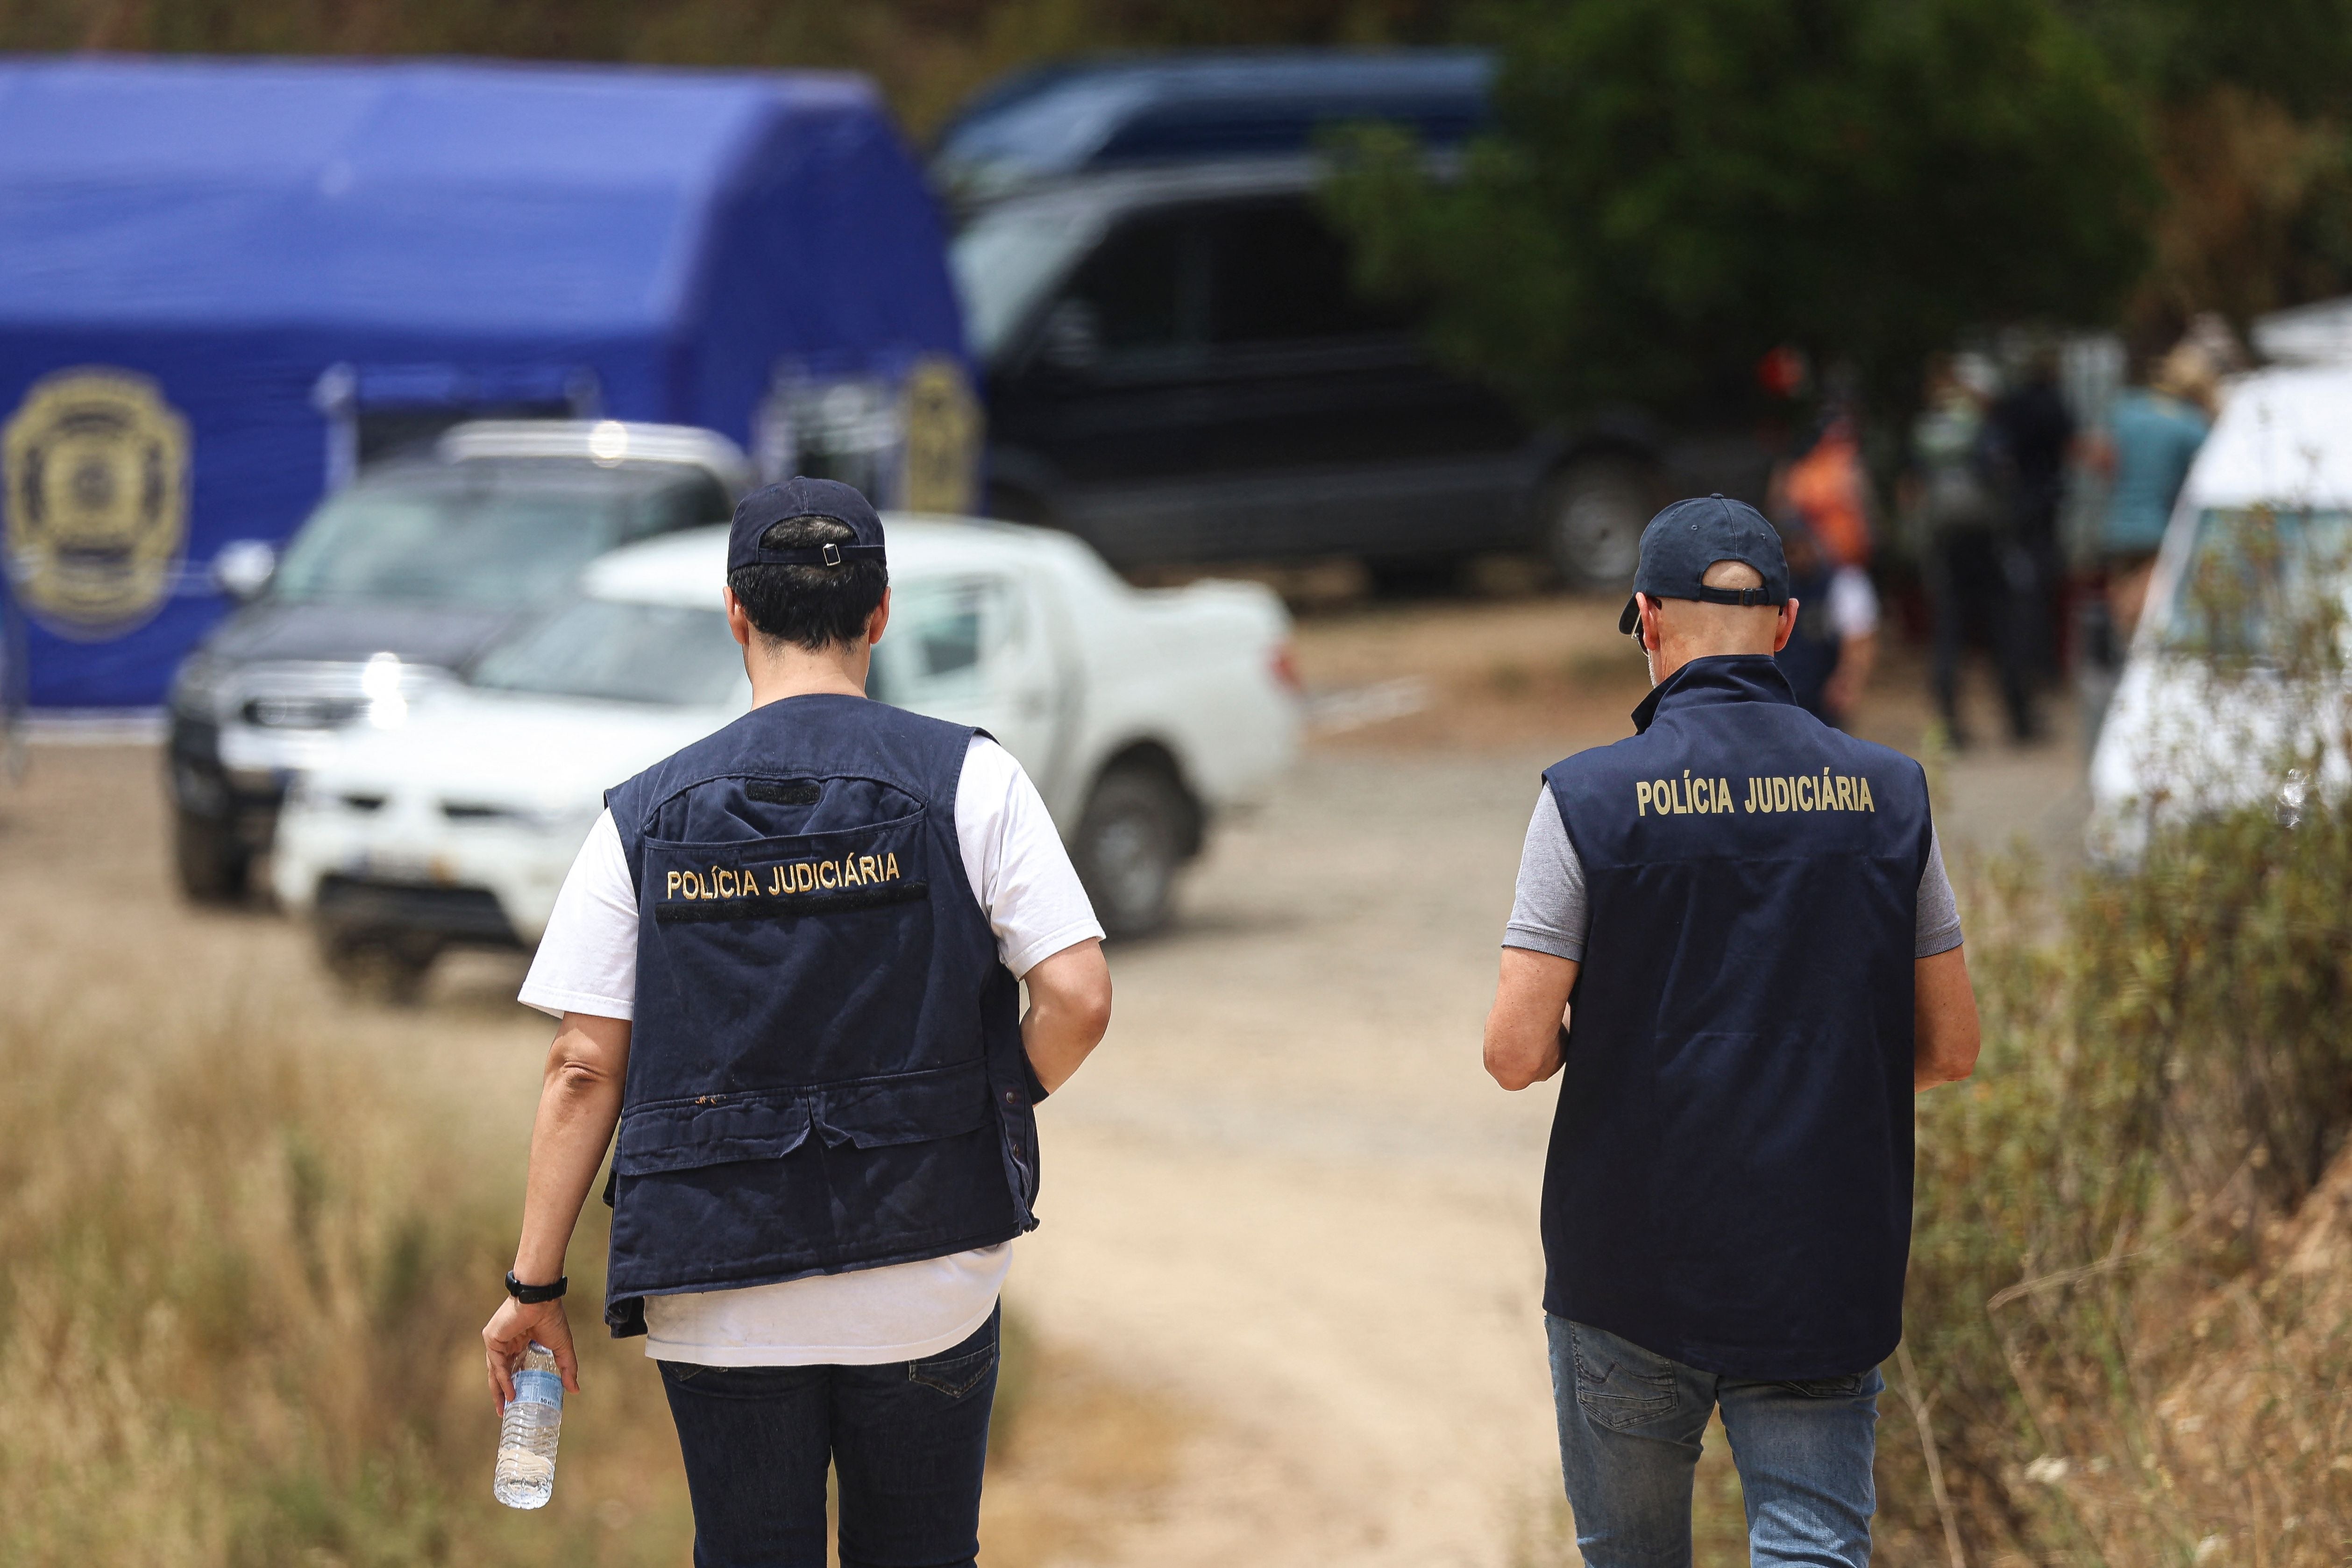 Policia Judiciaria officers at the search site